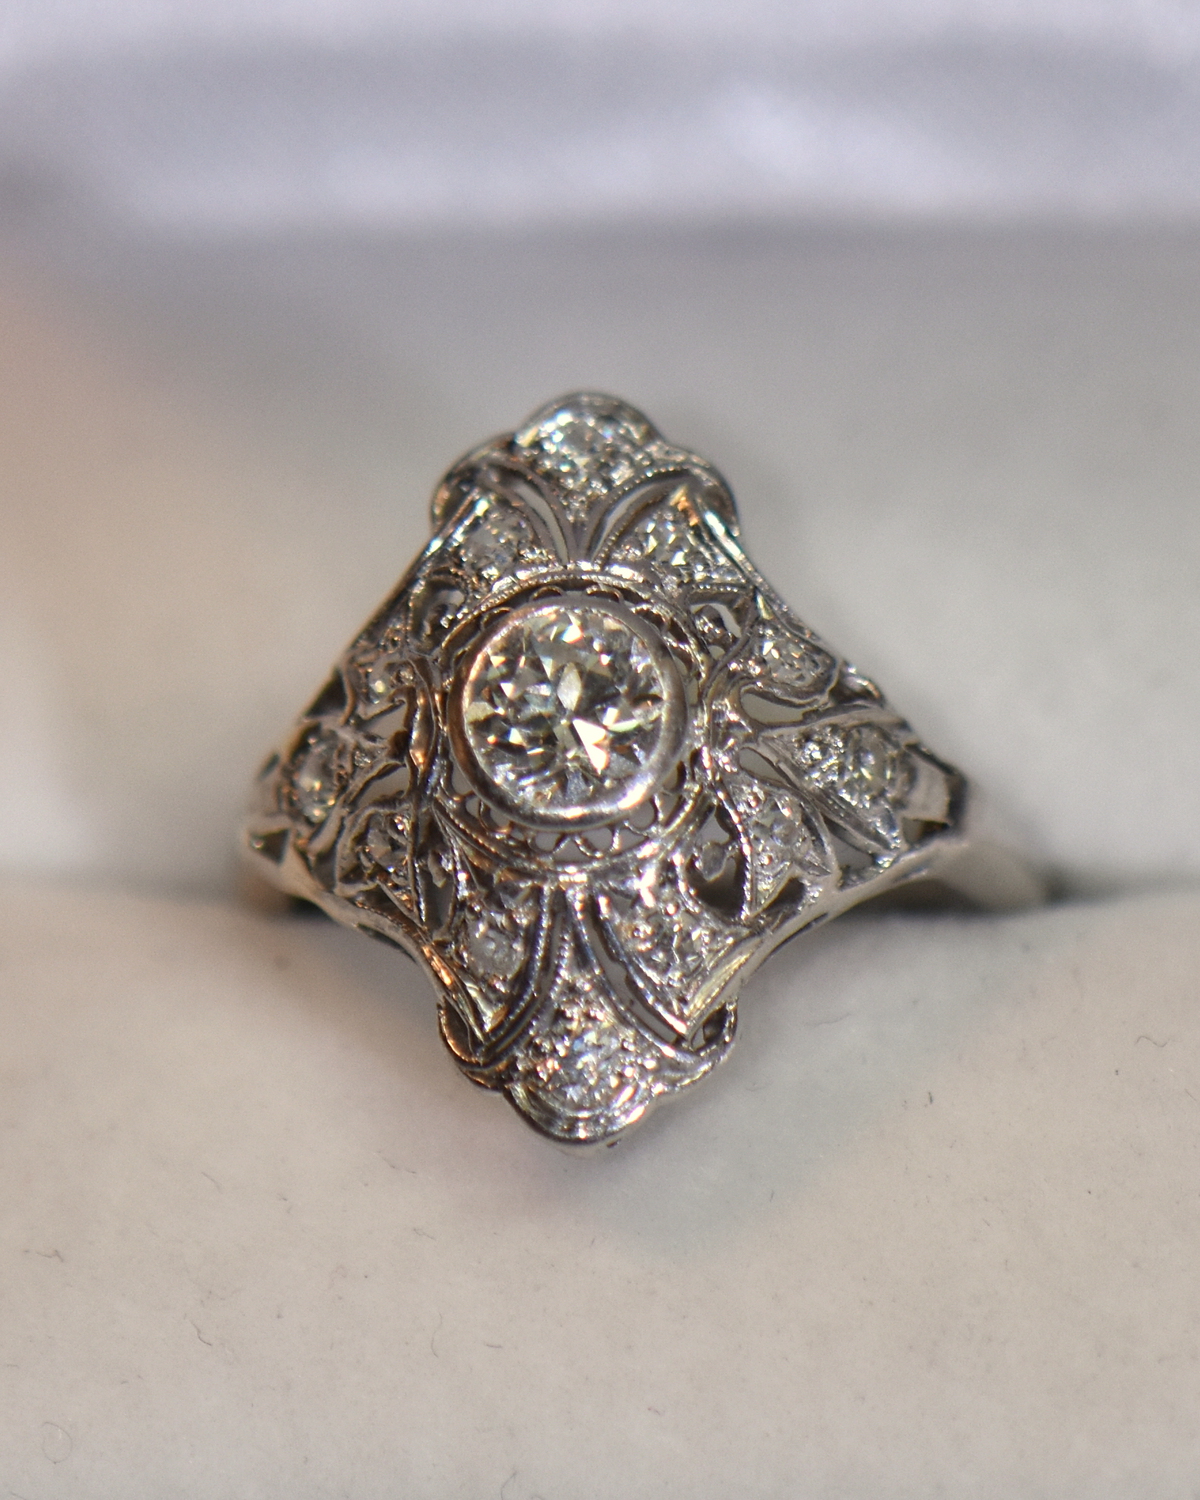 Vintage Diamond Cocktail Ring Art Deco 1930's Old Cut Diamond Filigree Ring  18k White Gold | Antique Vintage Estate Jewelry | Jewelry Finds